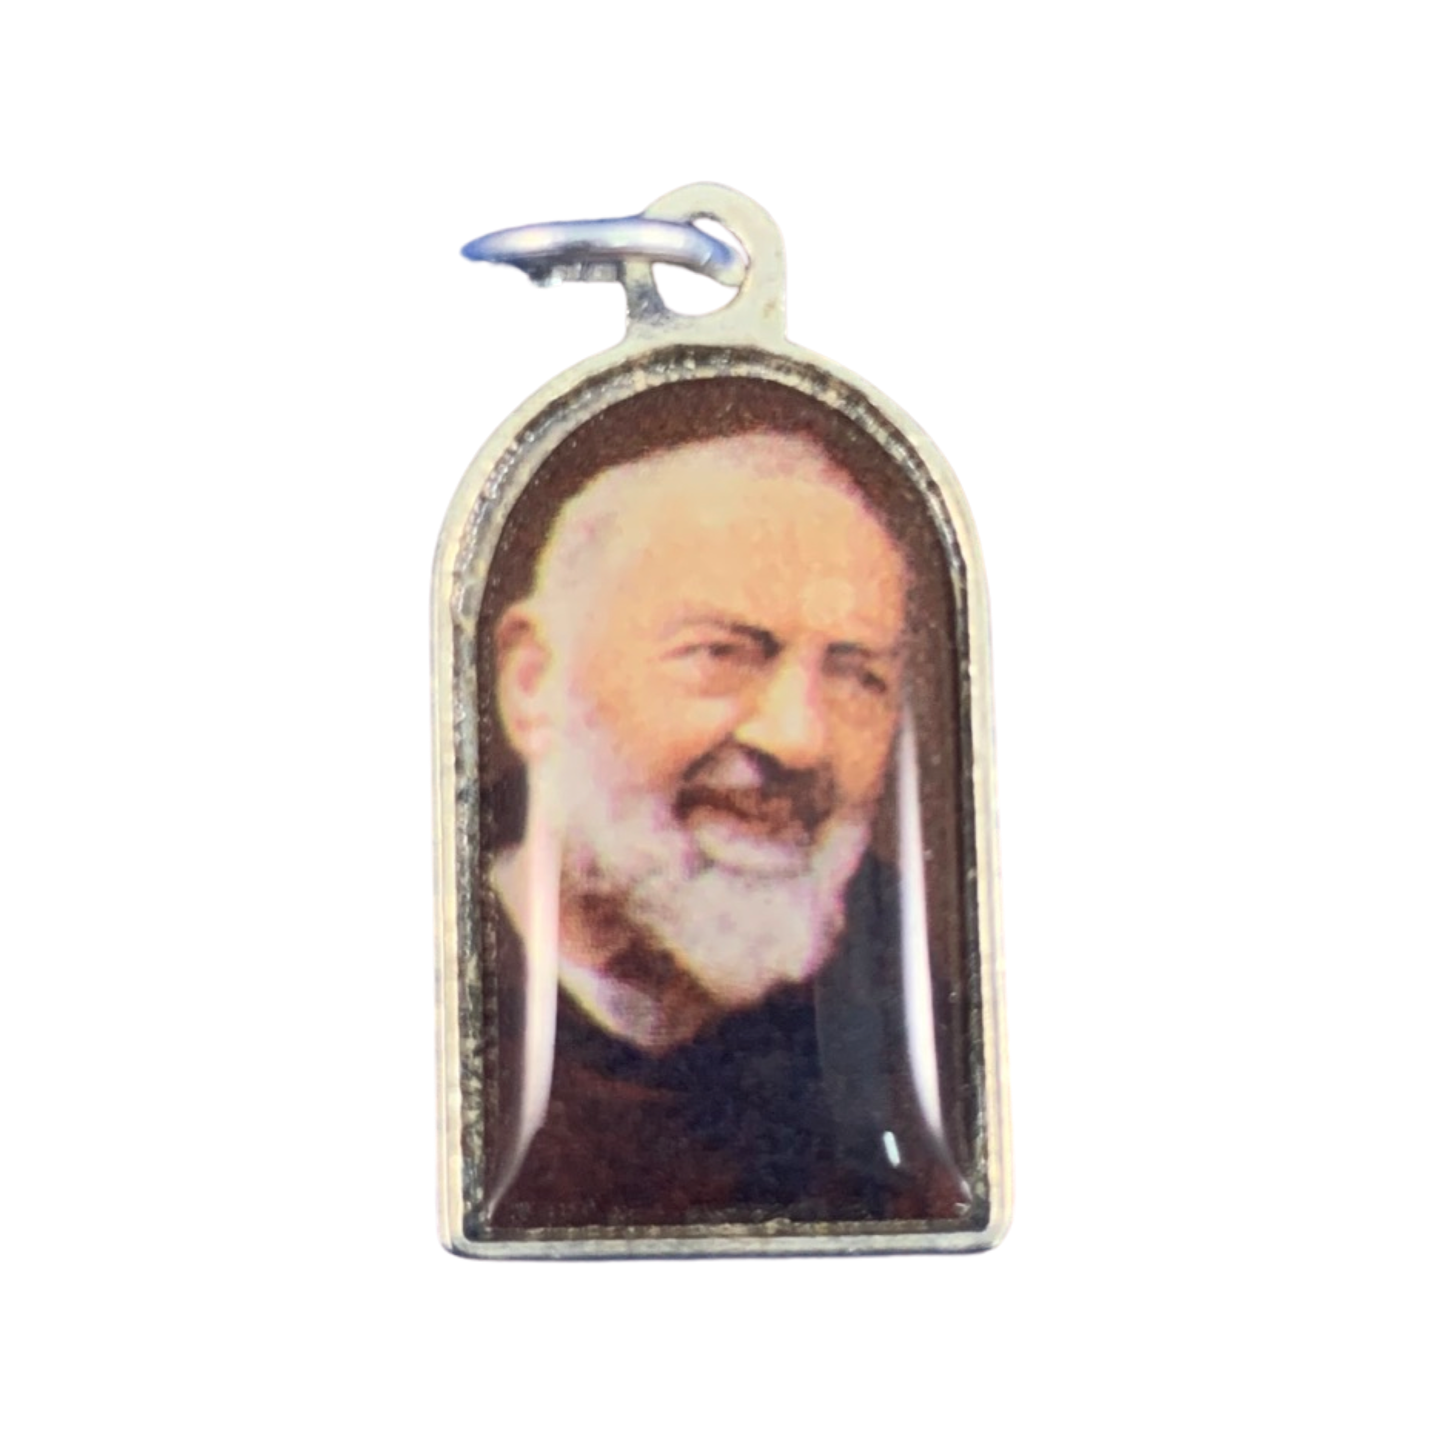 Arched Padre Pio Medal